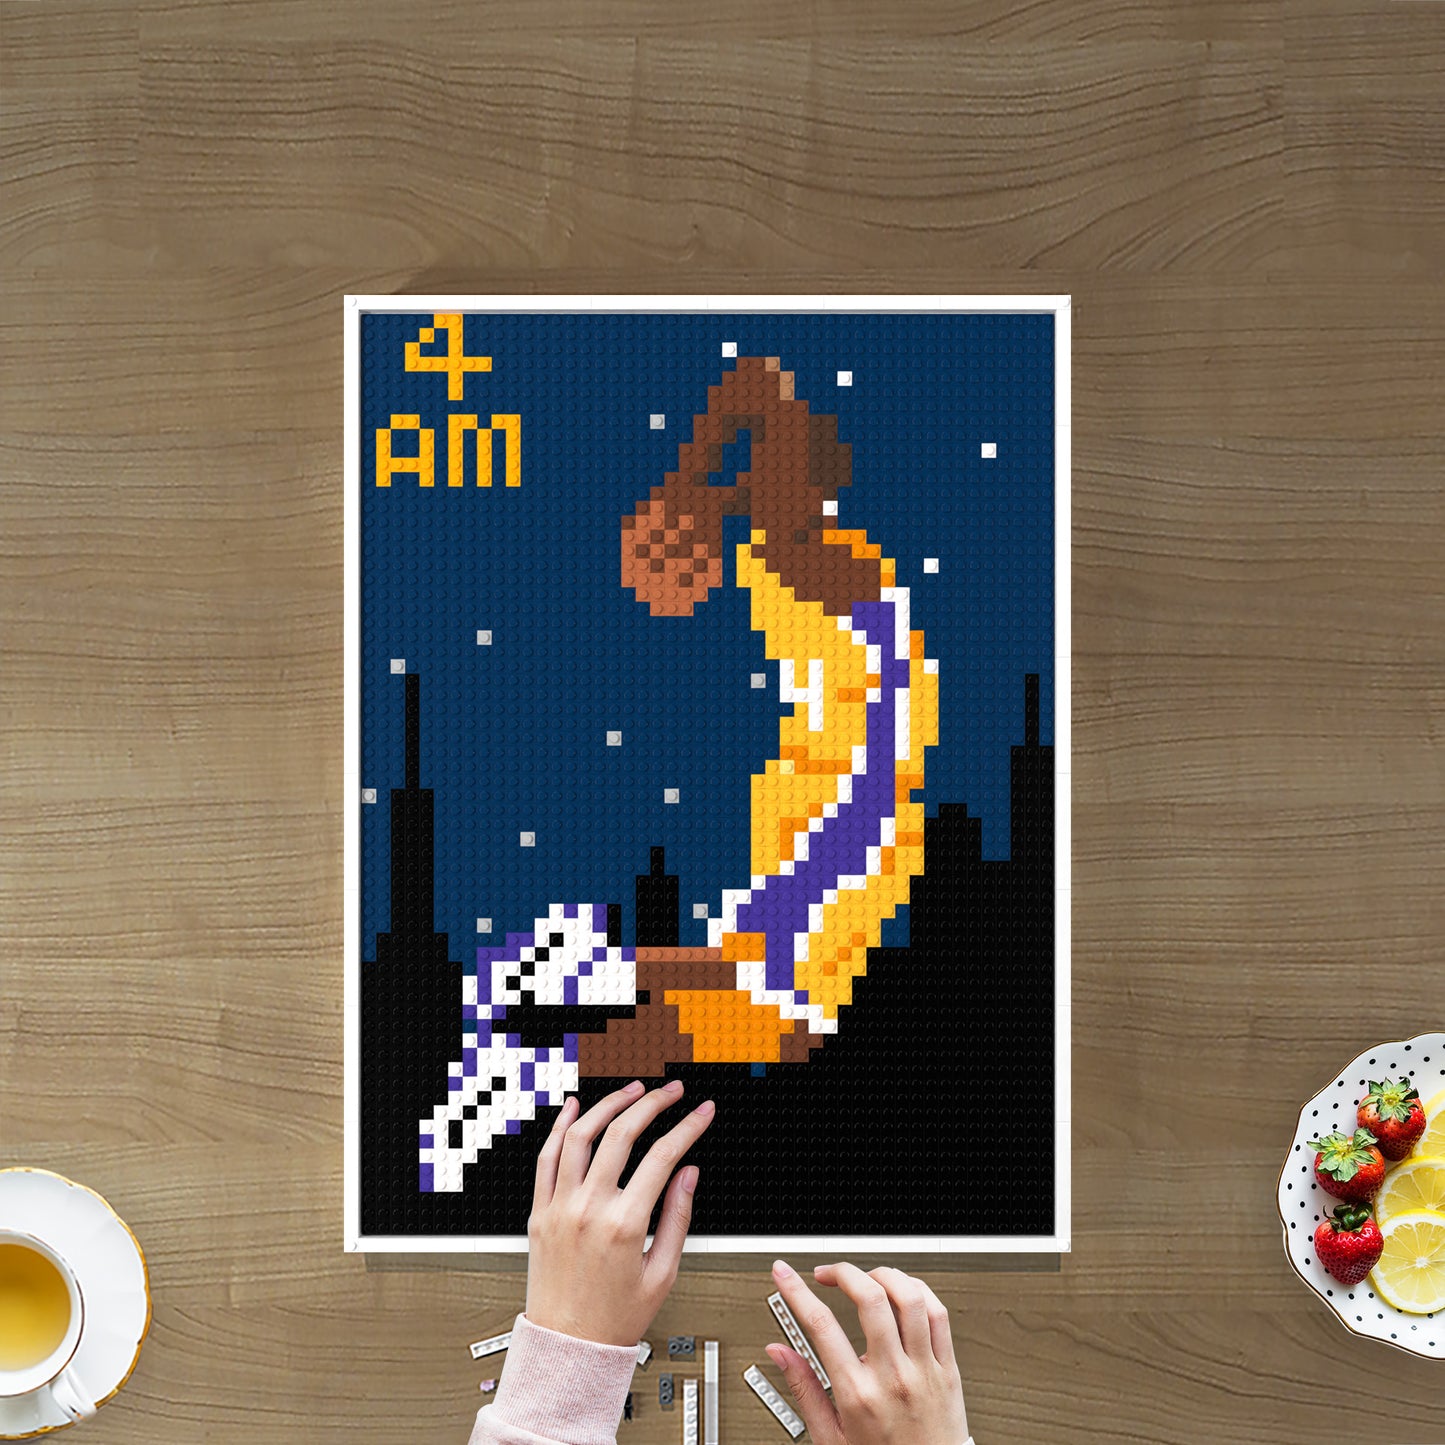 Basketball Star Hard Practice Compatible with Lego DIY Pixel Art Blocks Set with Frame